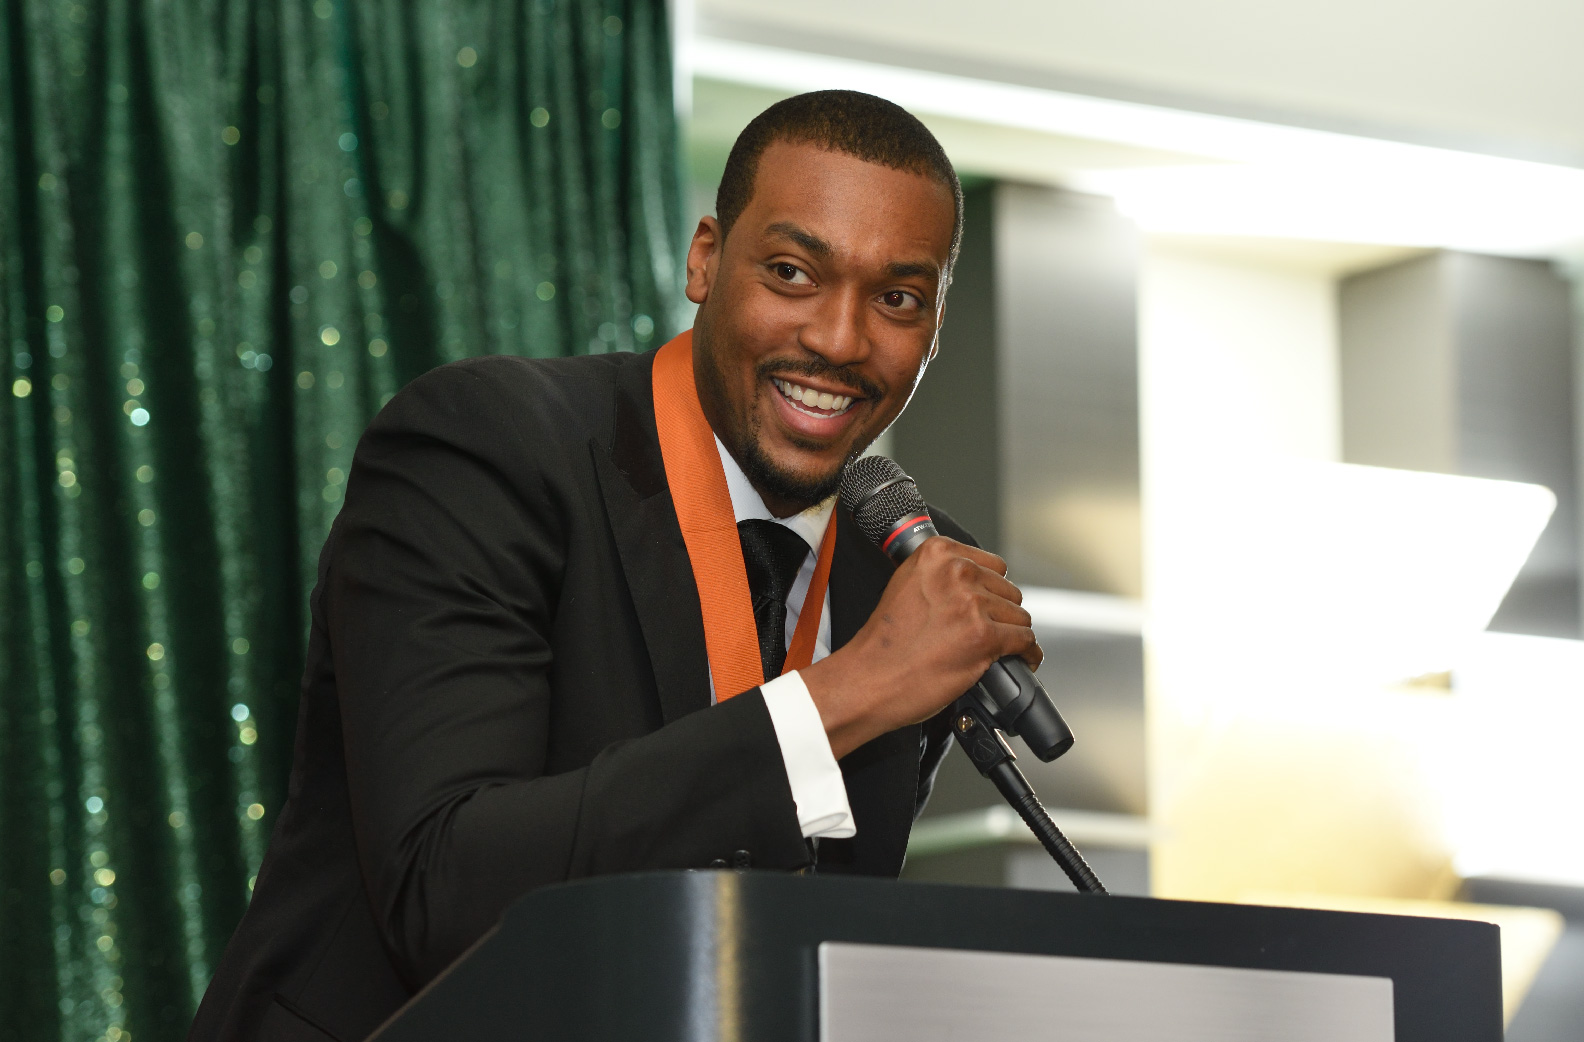 Man speaking on stage at an event